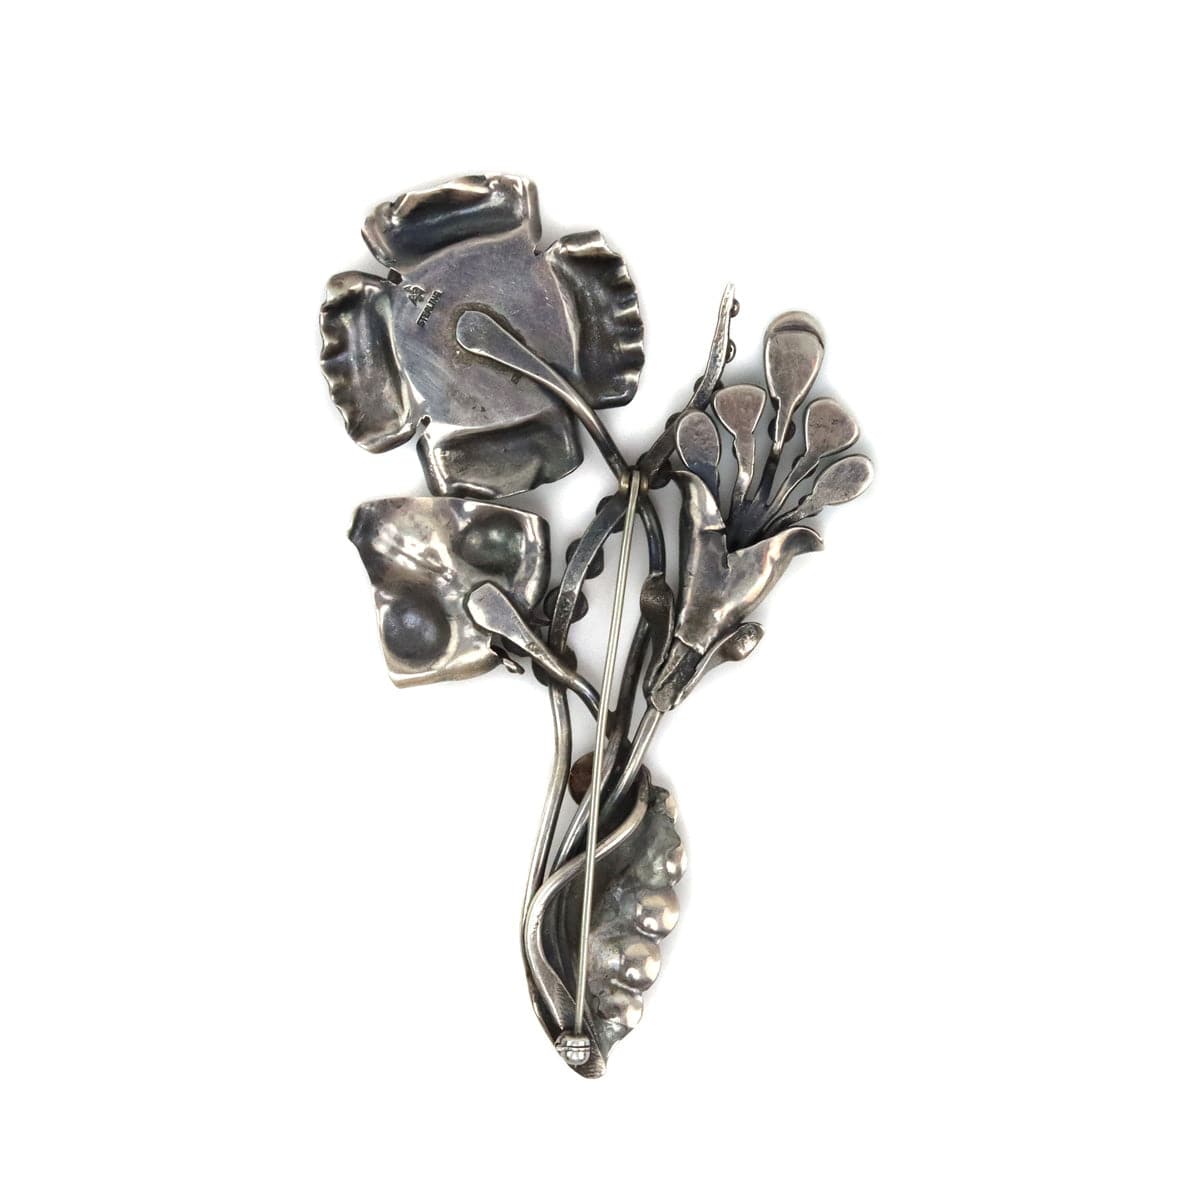 Frank Patania Sr. (1898-1964) - Turquoise and Silver Pin with Floral Design c. 1950s, 4.25" x 2.5" (J91699-1022-017) 1